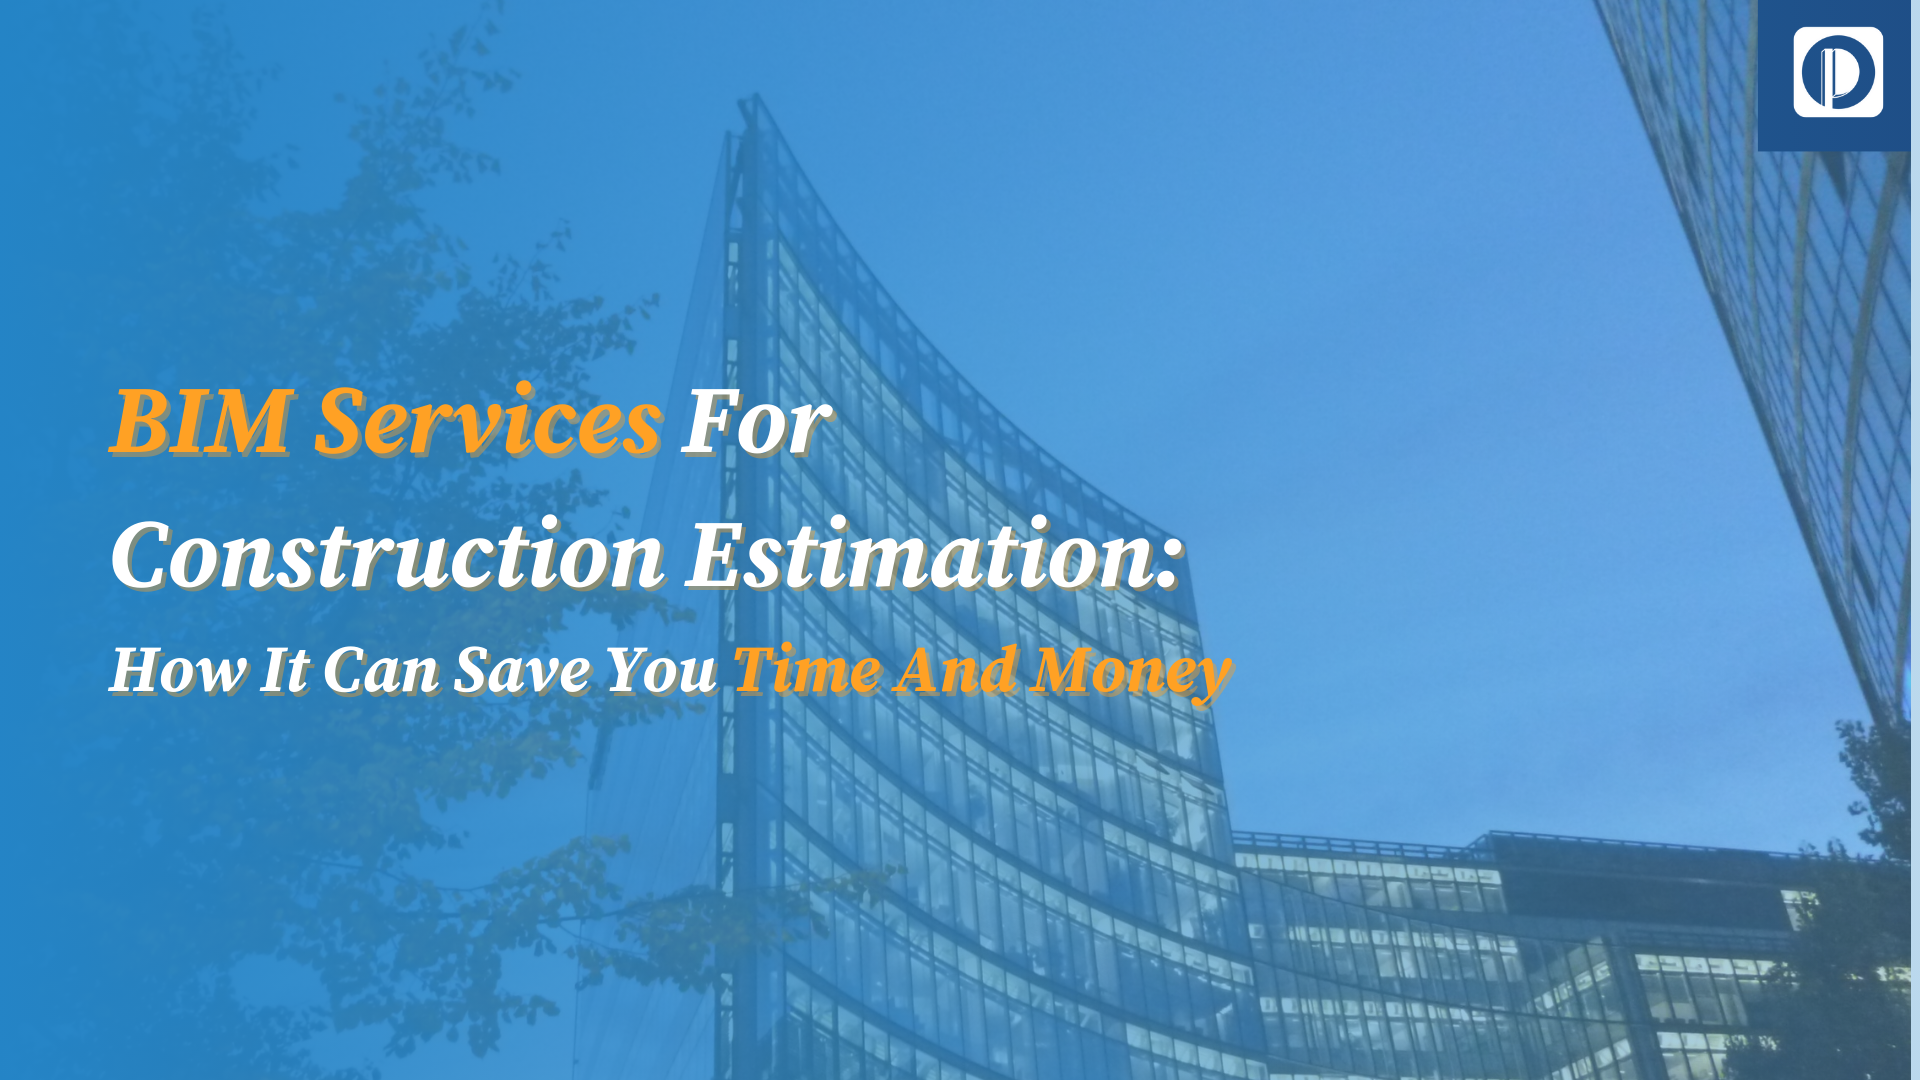 BIM Services For Construction Estimation How It Can Save You Time And Money